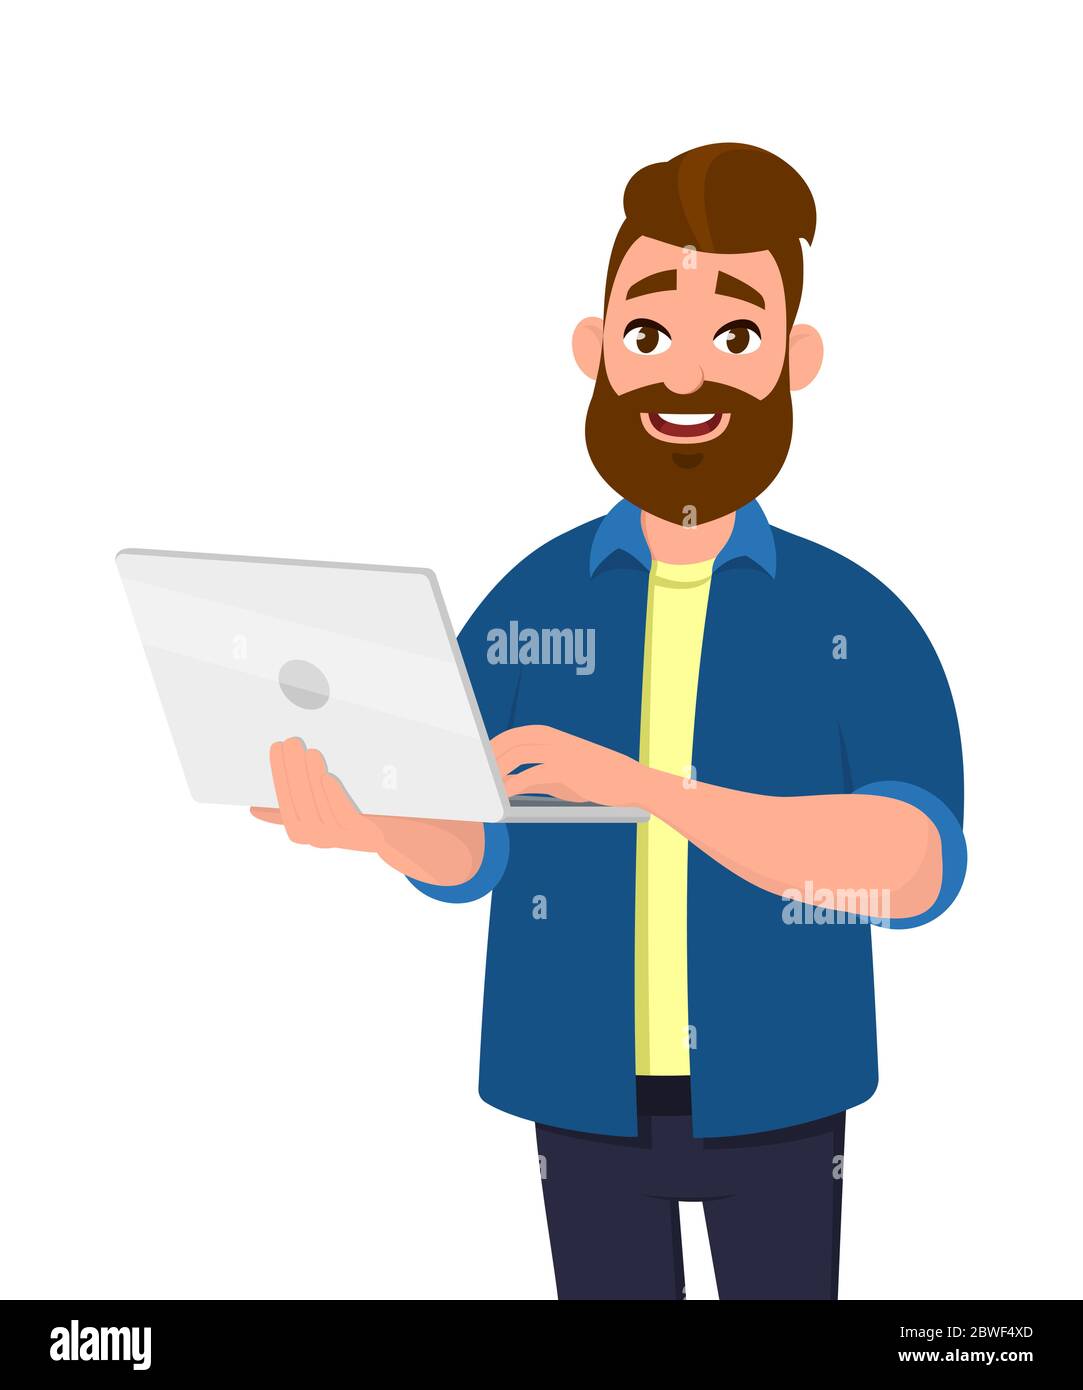 Successful young man holding/using laptop computer (PC). Laptop computer technology concept in vector illustration style. Stock Vector